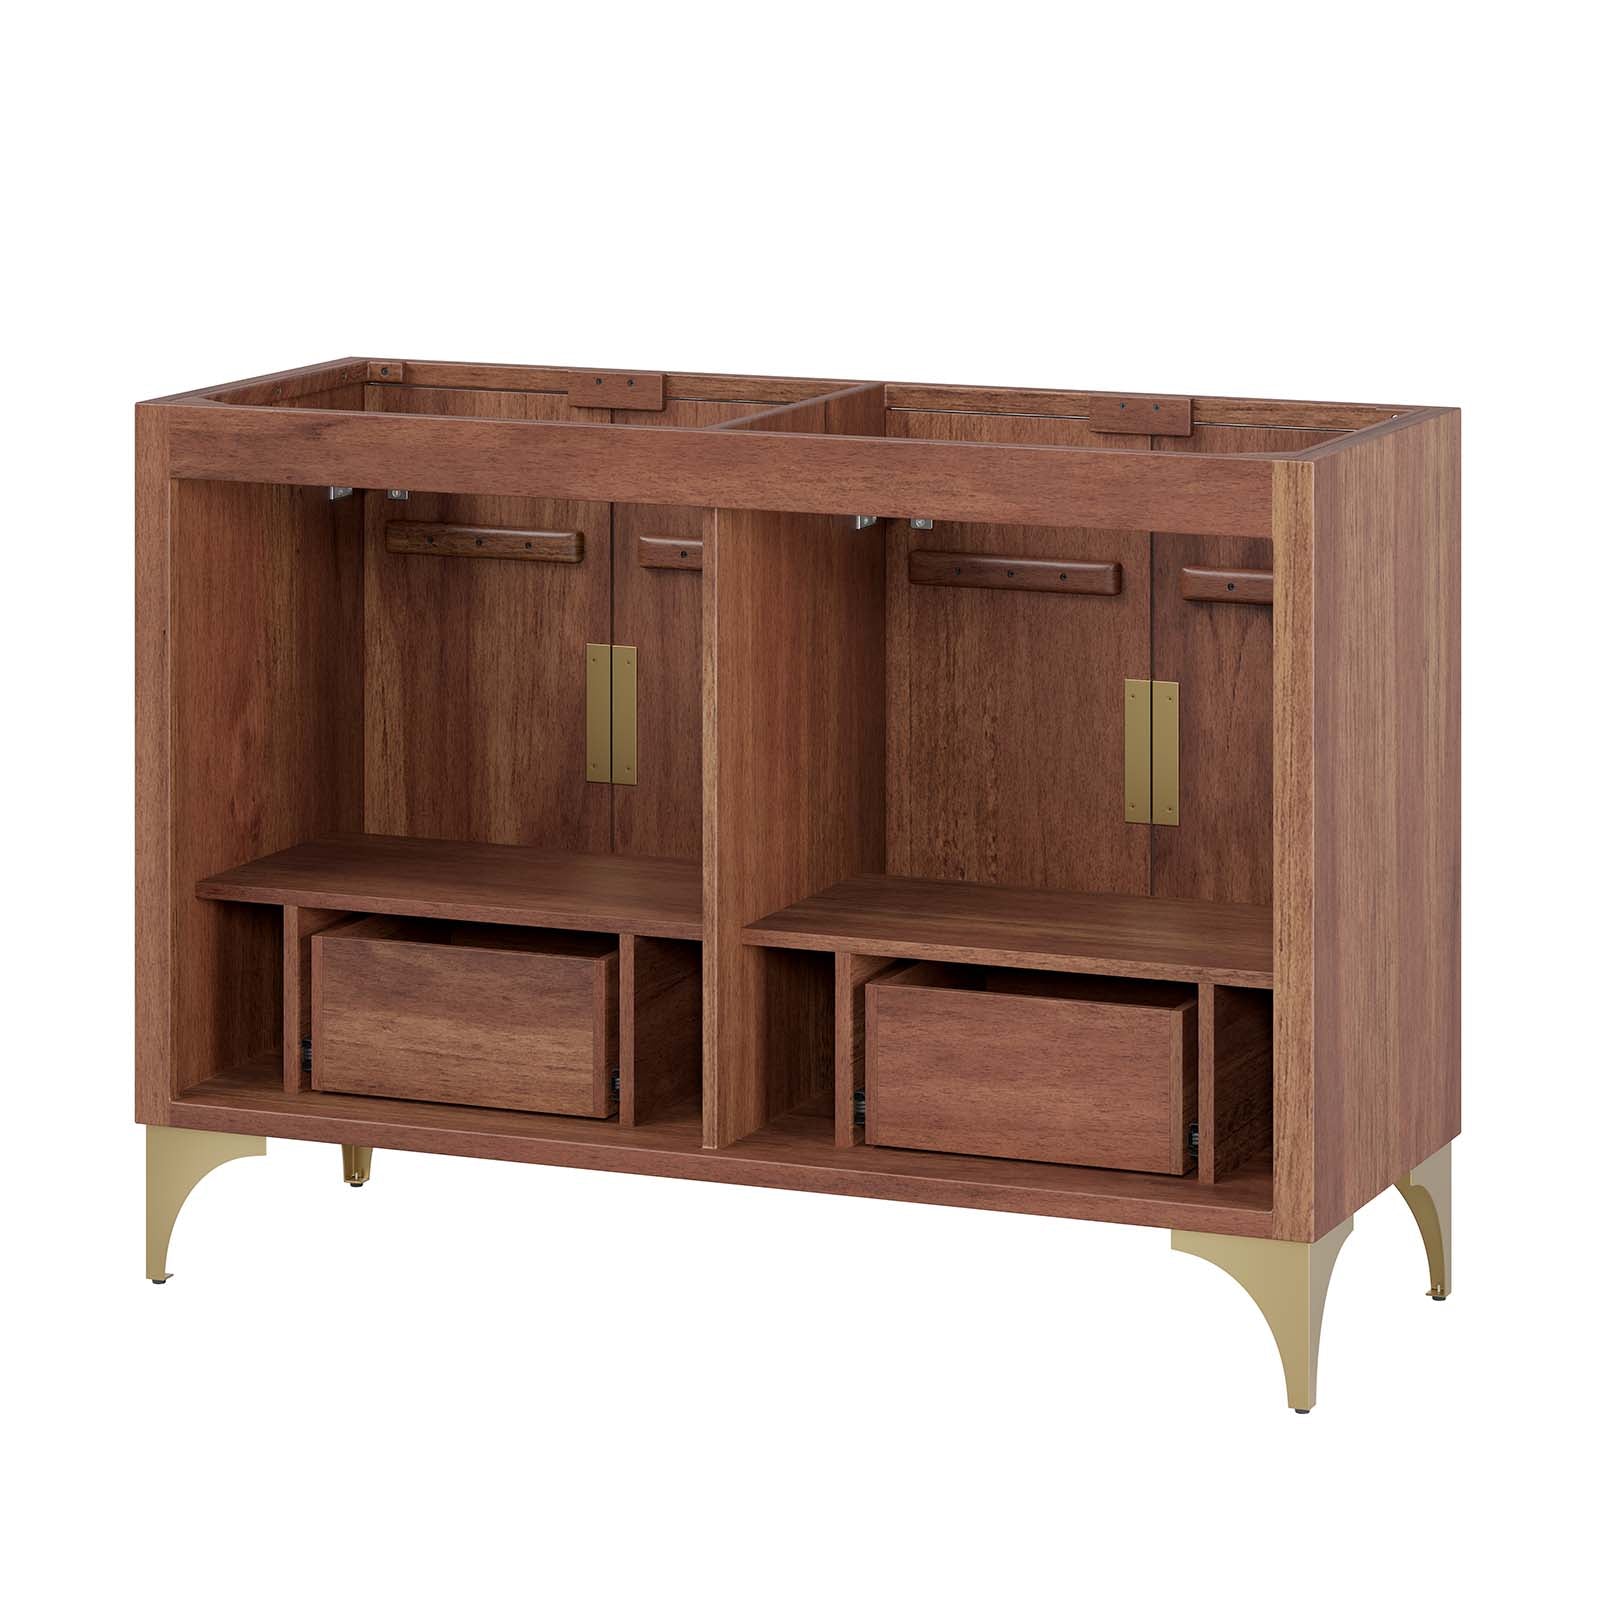 Daylight 48" Double Sink Compatible Bathroom Vanity Cabinet (Sink Basin Not Included) - East Shore Modern Home Furnishings